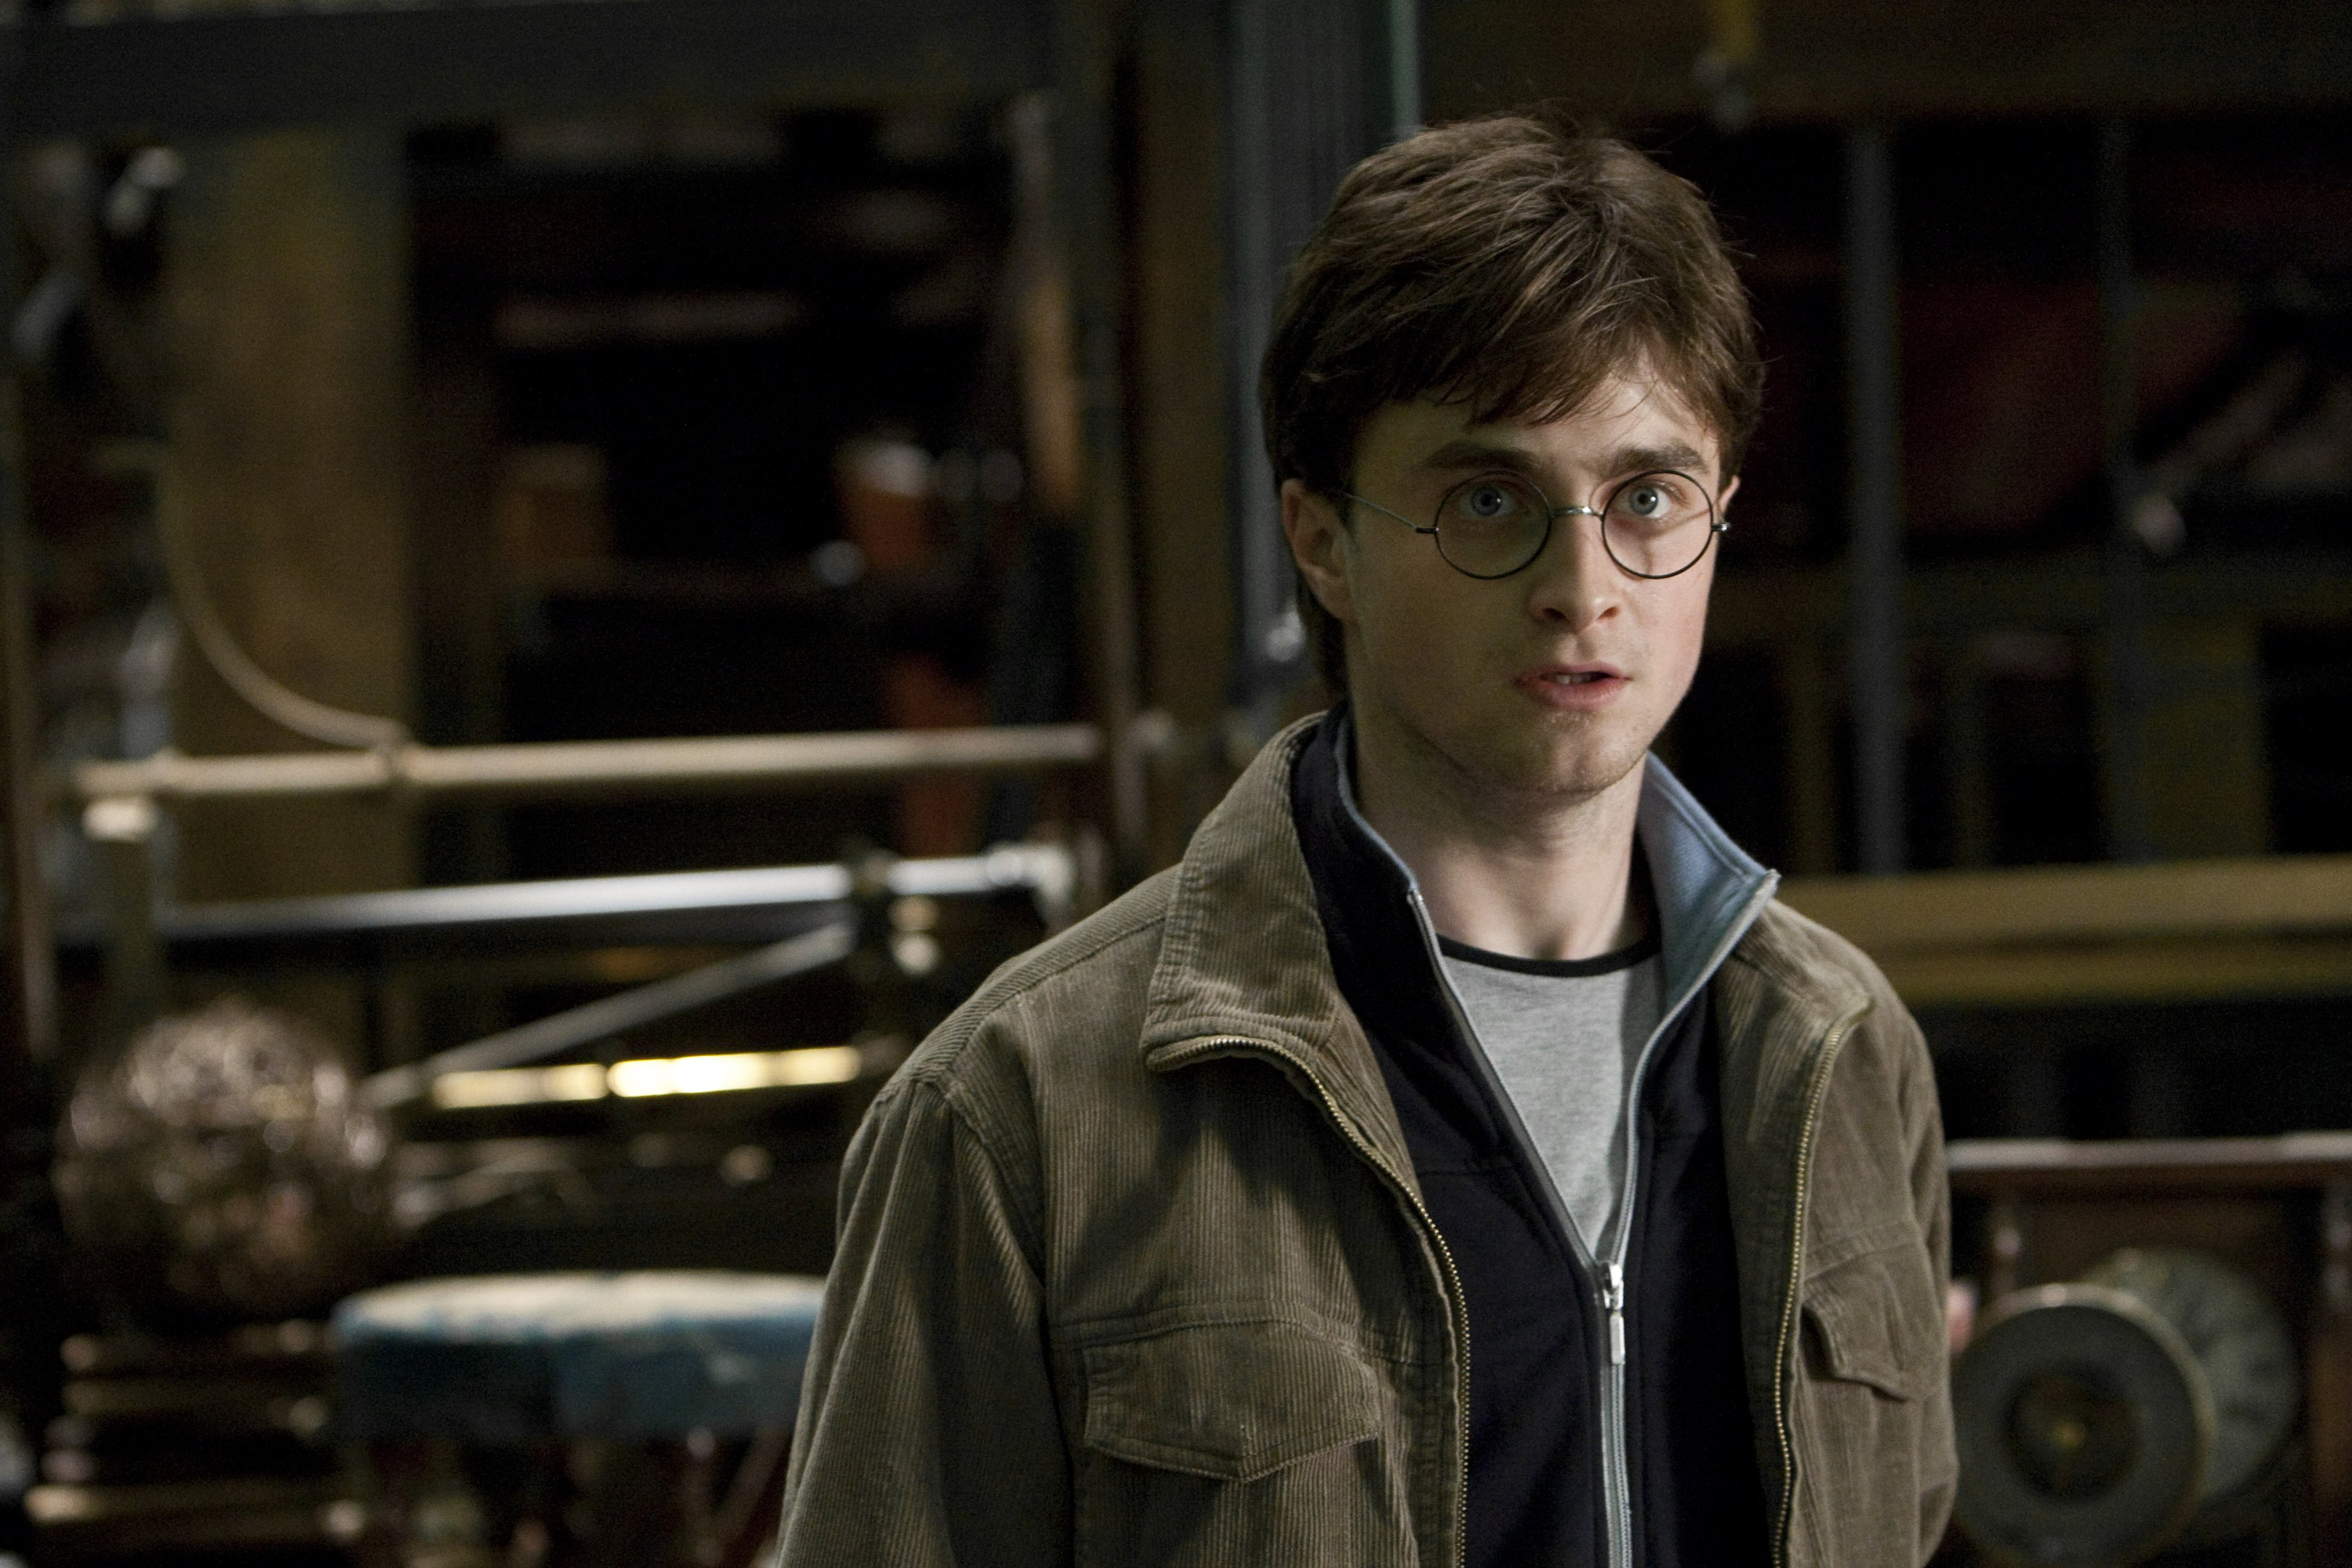 Harry Potter and the Deathly Hallows: Part 2 HD Wallpaper